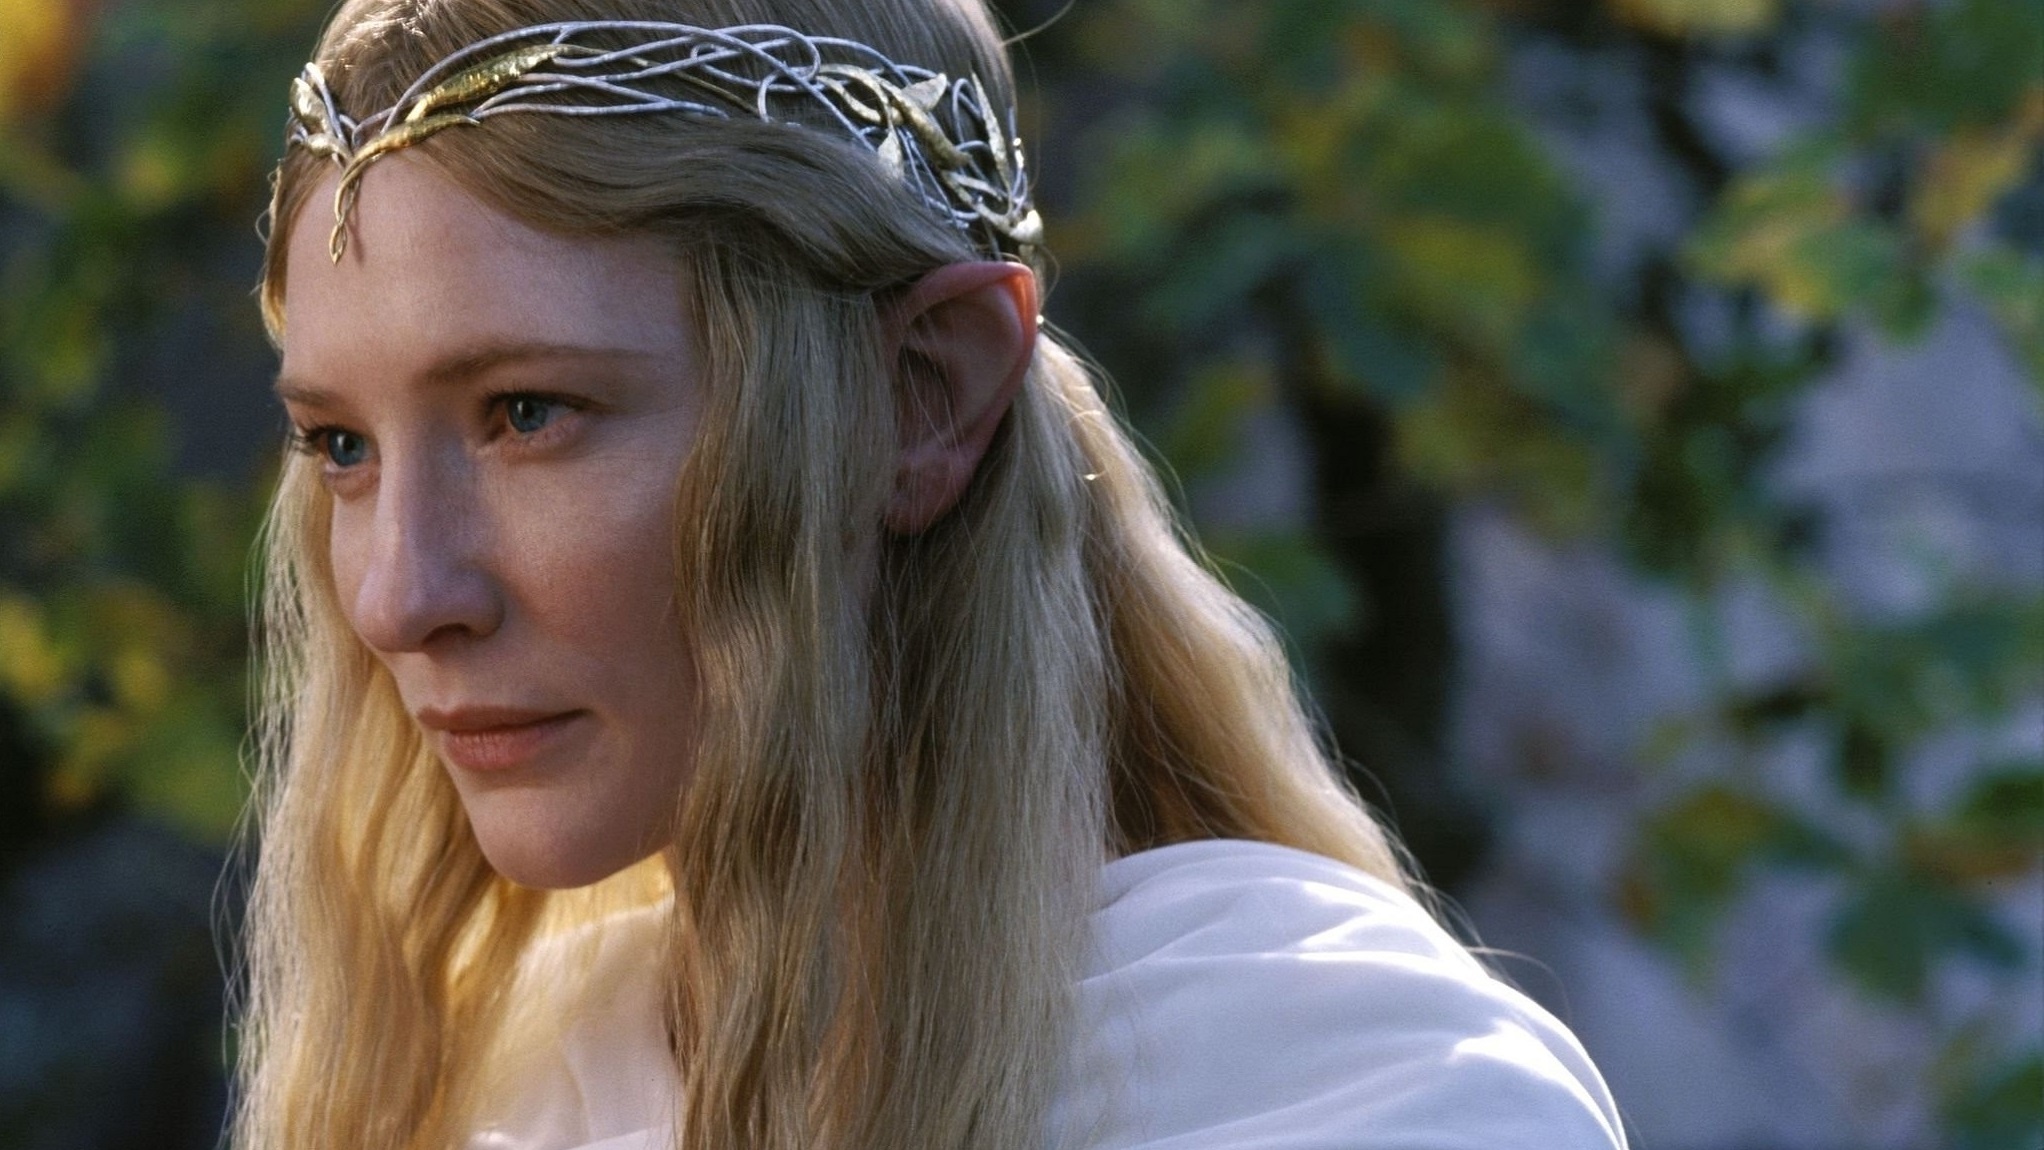 Cate Blanchett as Galadriel, Exquisite portrait, Elven queen, Lord of the Rings, 2050x1150 HD Desktop